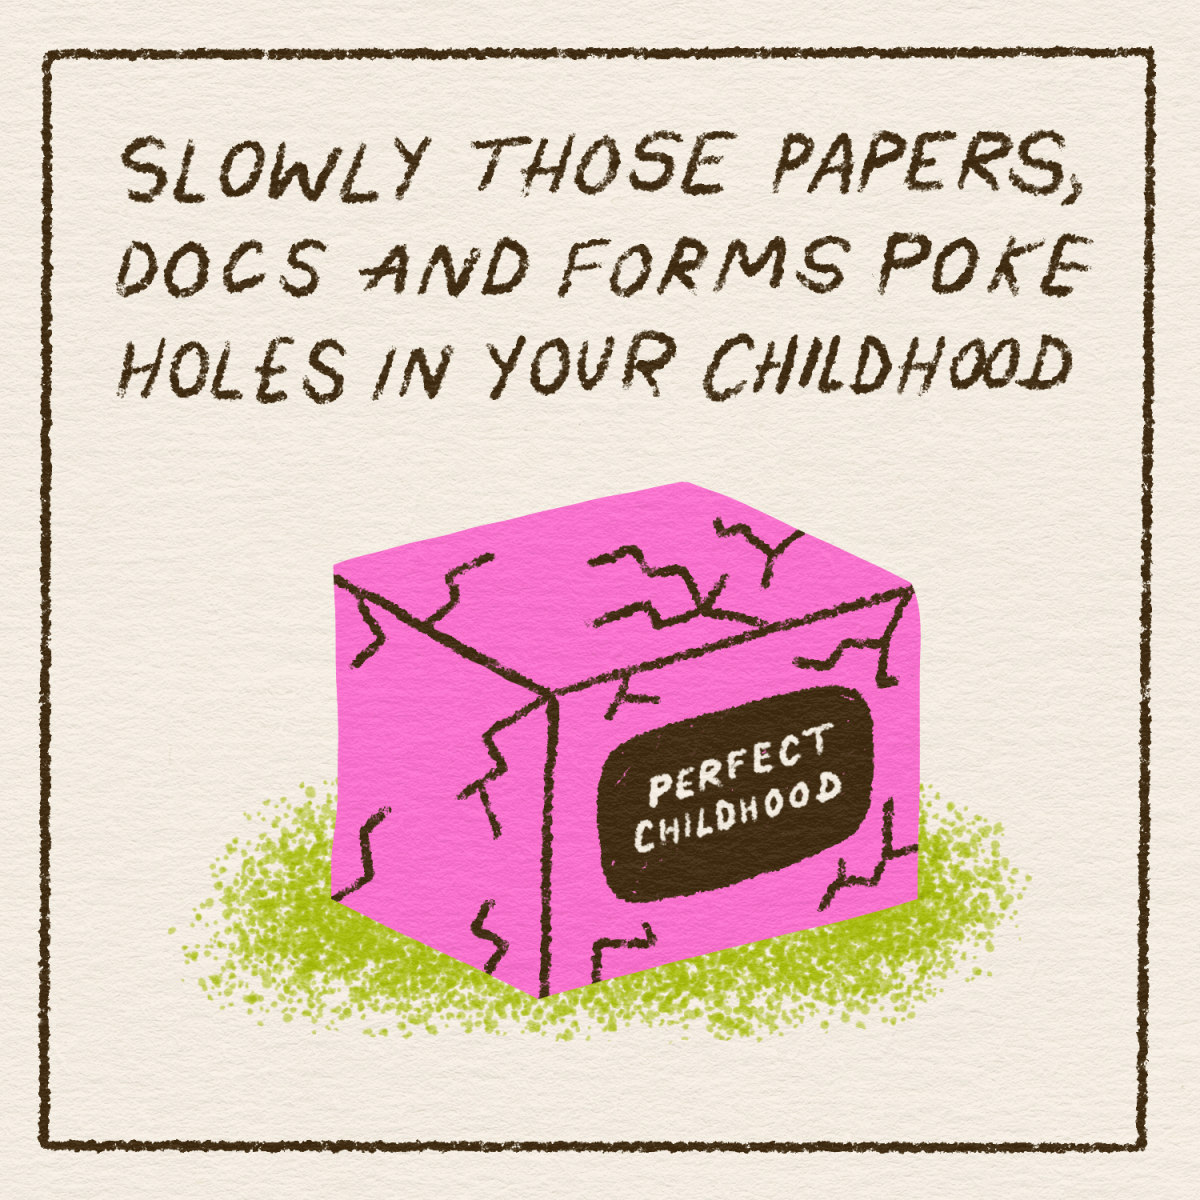 slowly those papers, docs and forms poke hols in your childhood